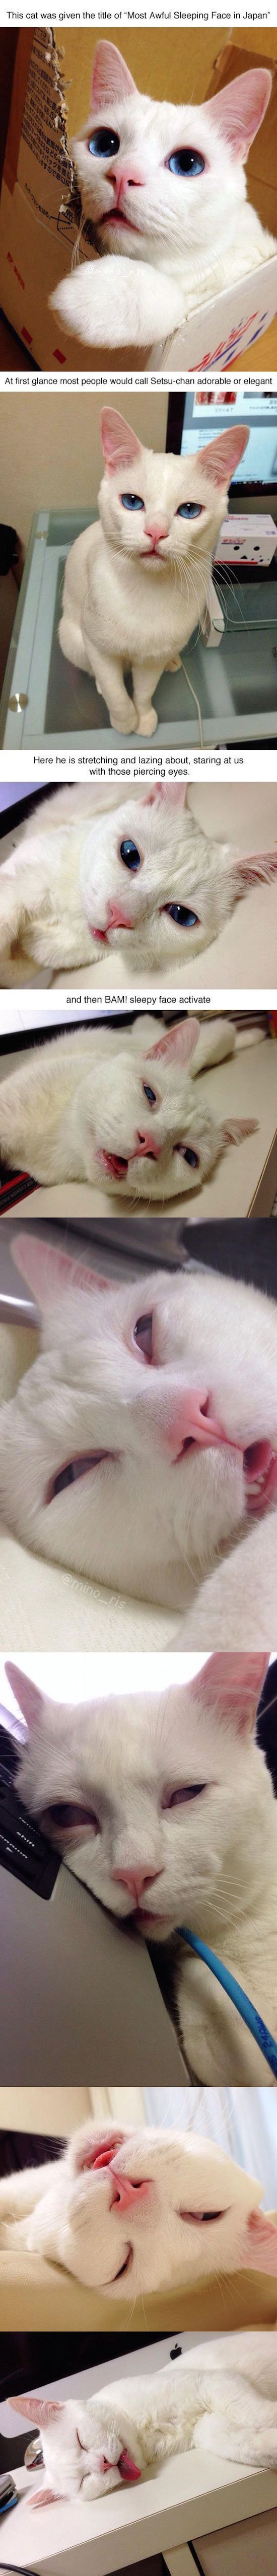 funny pictures of cat with awful sleeping face